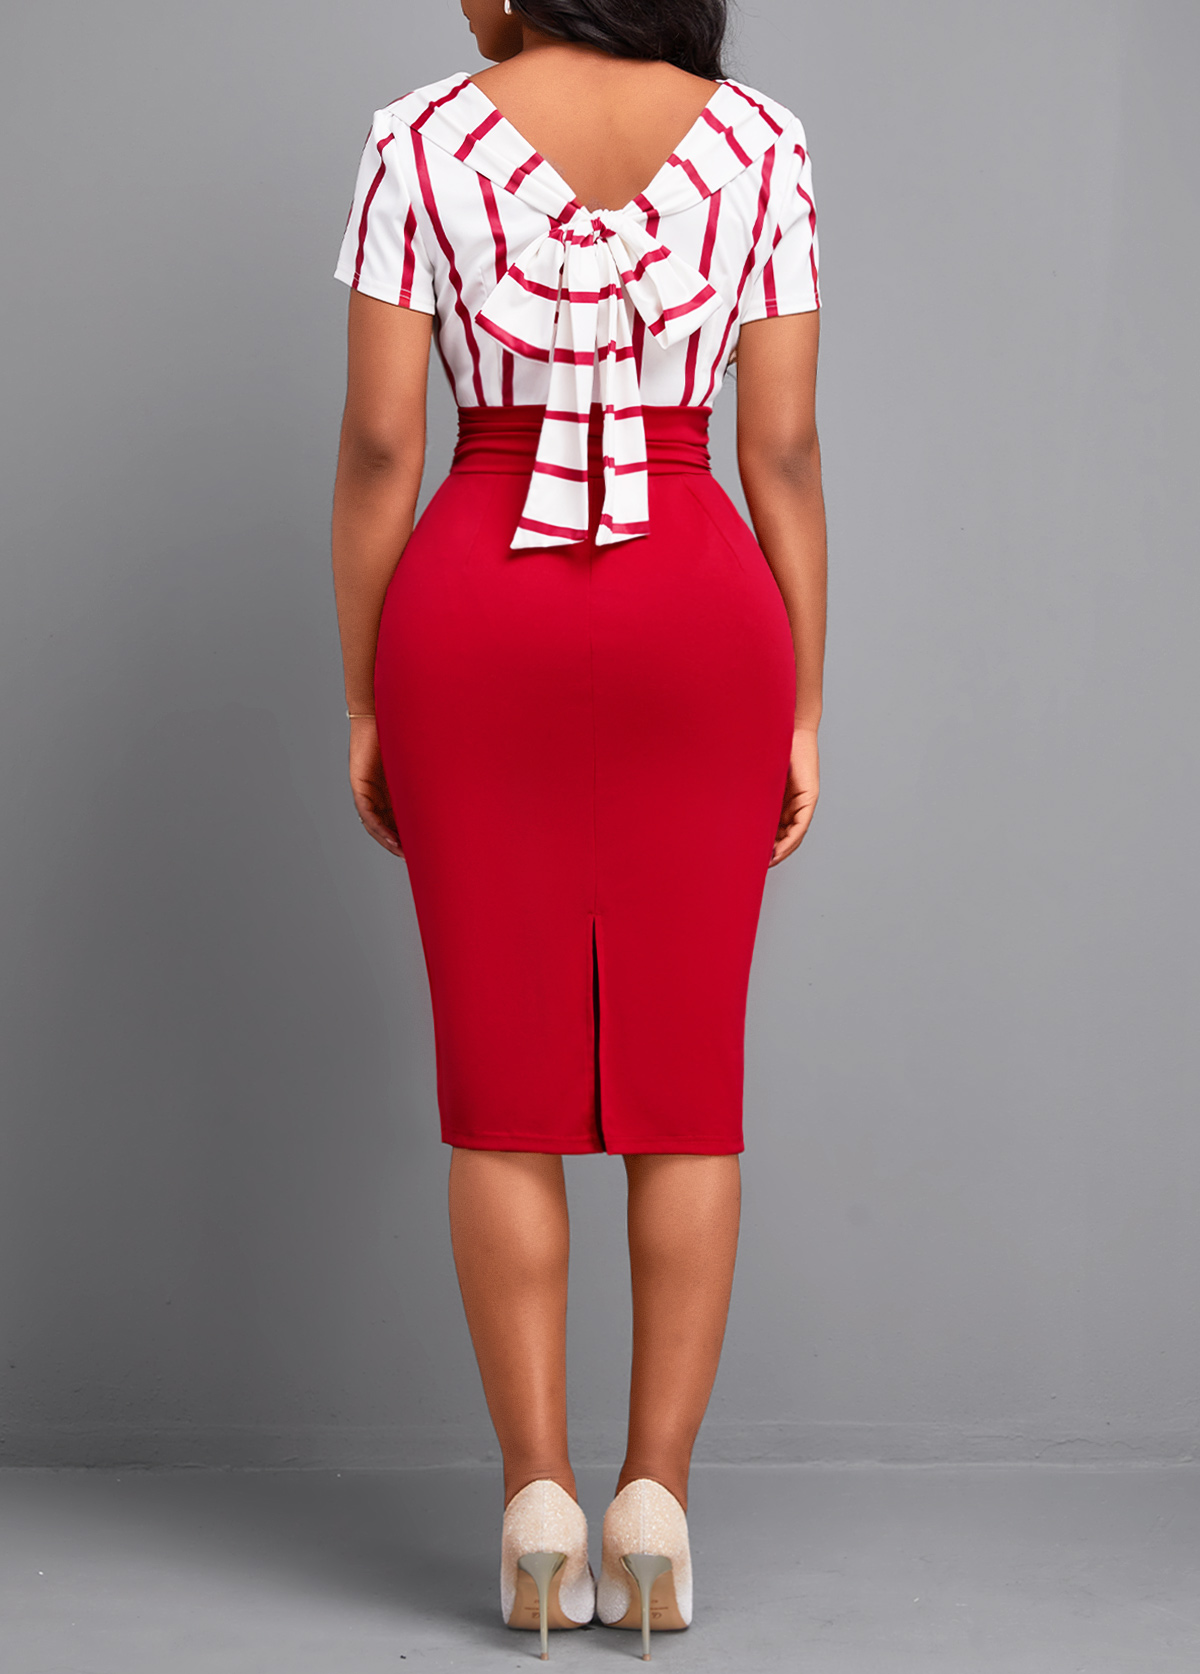 Striped Bowknot Red Short Sleeve Draped Neck Bodycon Dress